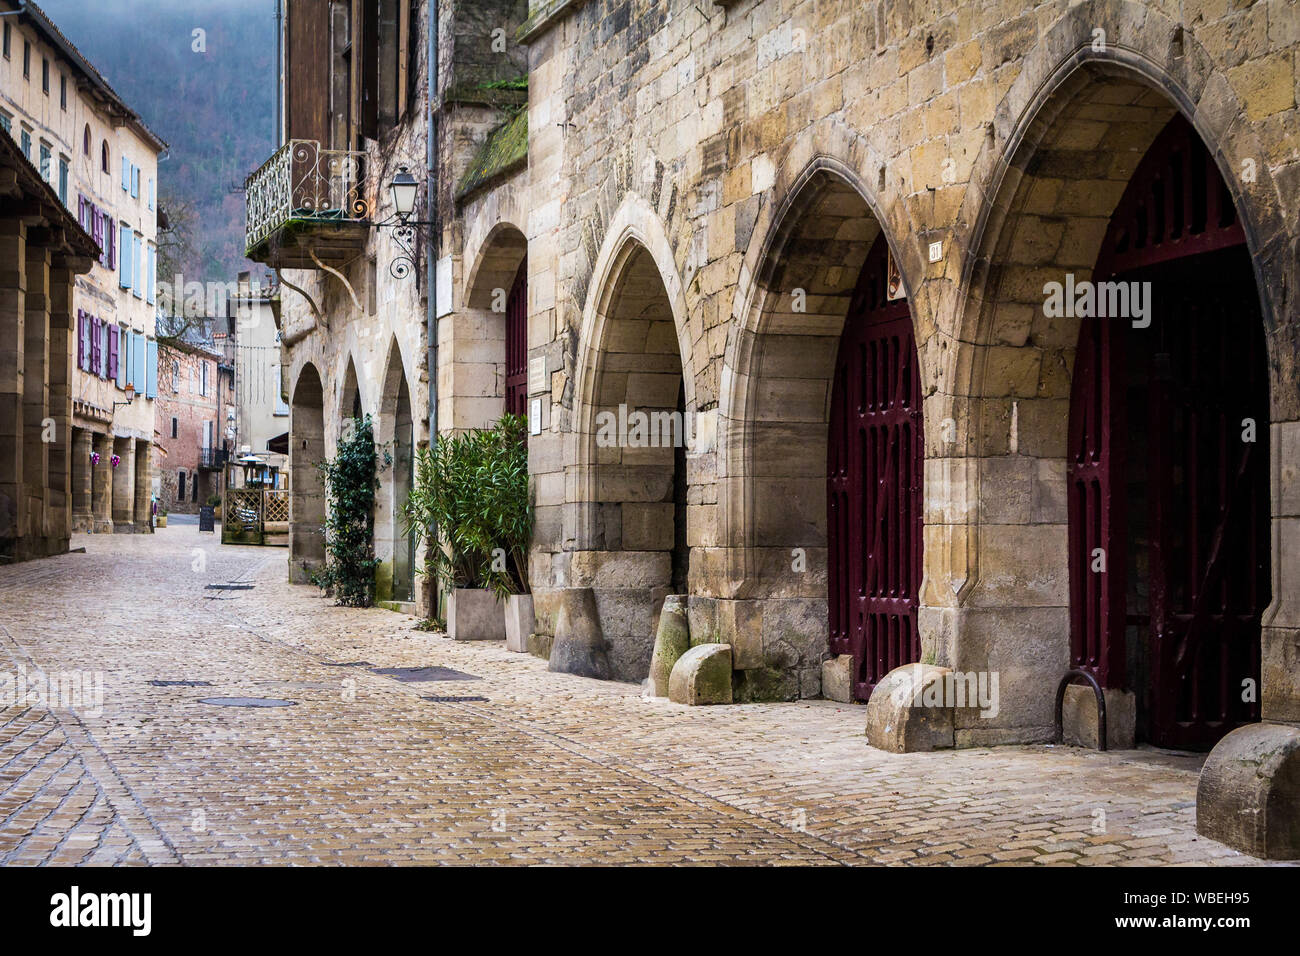 Saint-Antonin-Noble-Val, France - January 08, 2013: houses, streets, river and architecture of the village Stock Photo